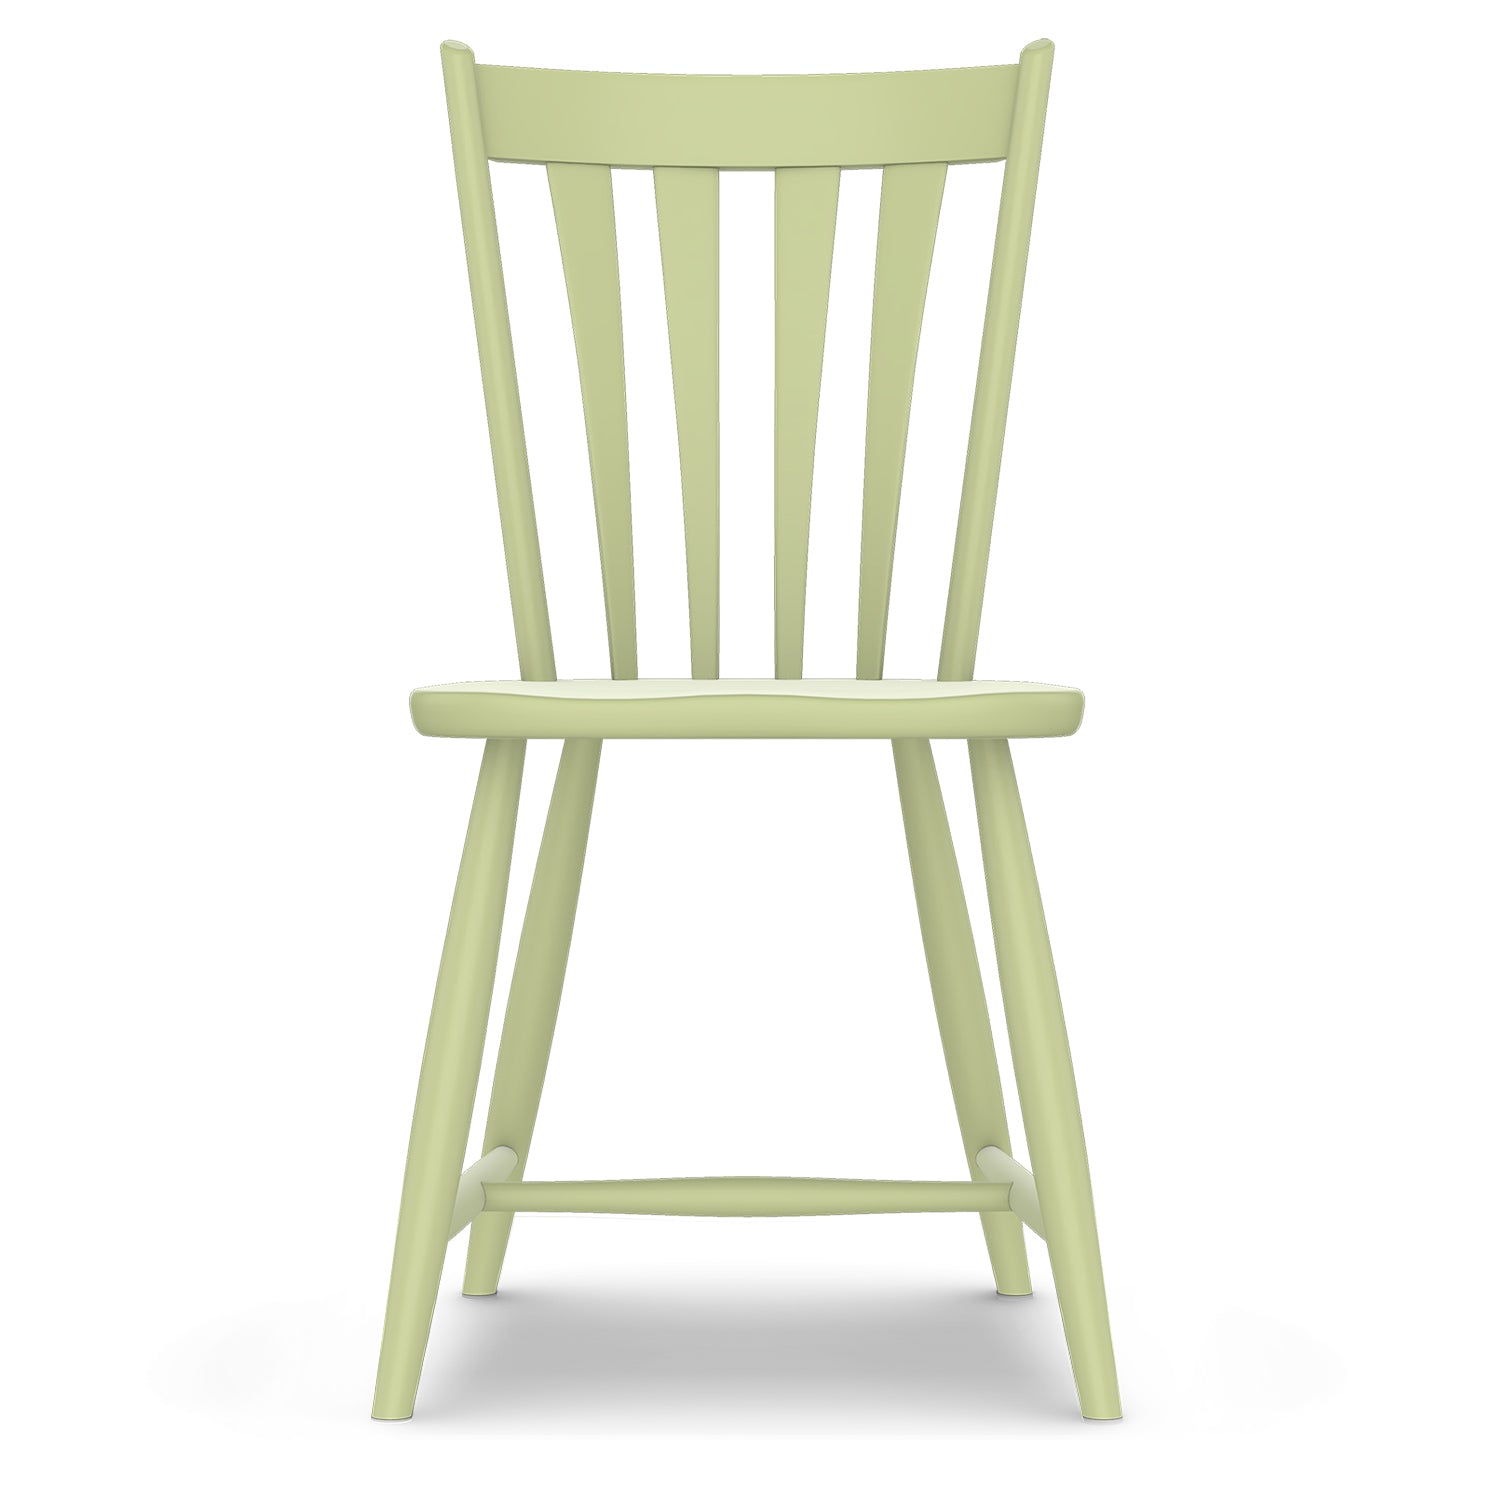 Maine Cottage Edna Dining Chair | Painted Modern Windsor Dining Chair 